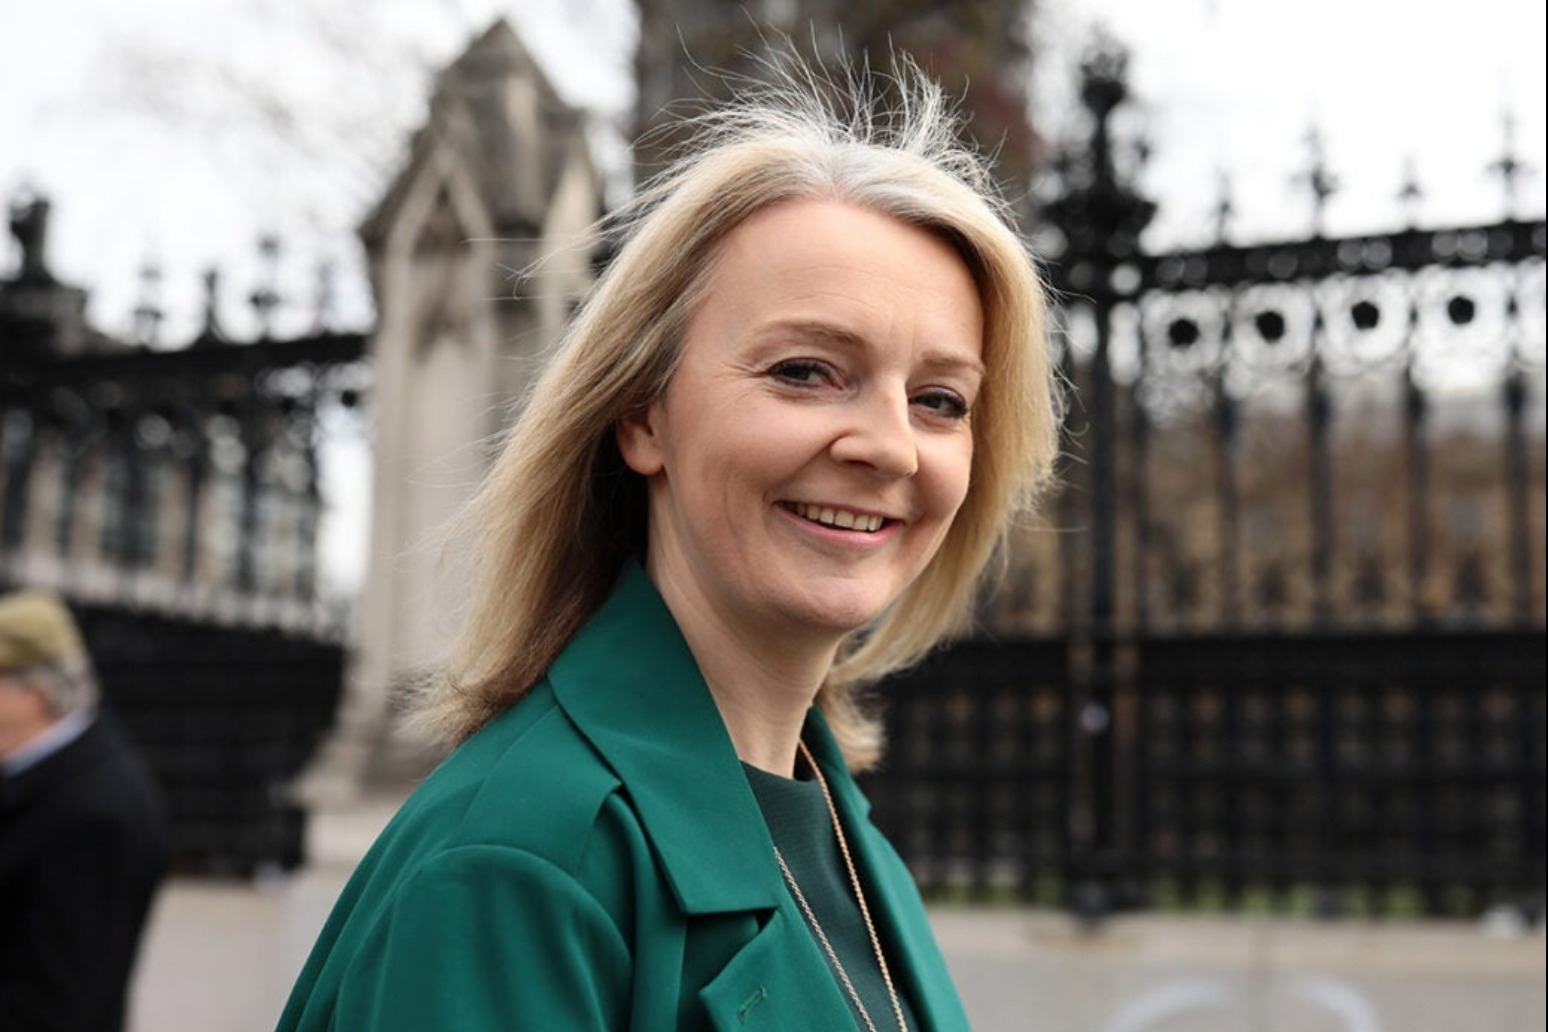 Liz Truss to take on Brexit brief following Lord Frost’s resignation 